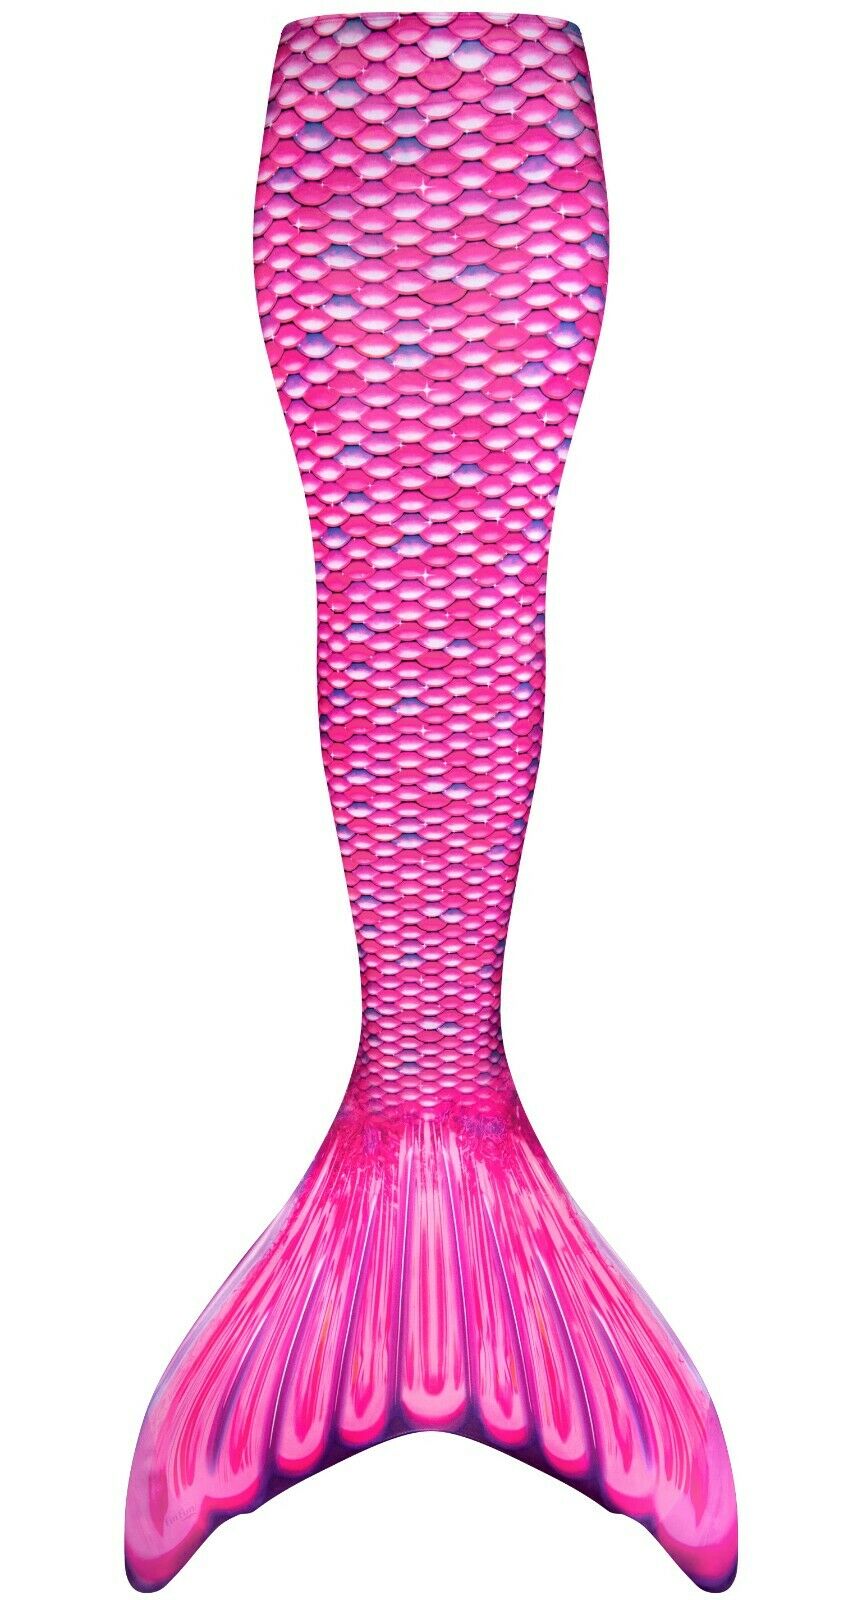 Kids Size Fin Fun Mermaid Replacement Tail Skins Swimming -Monofin Not Included